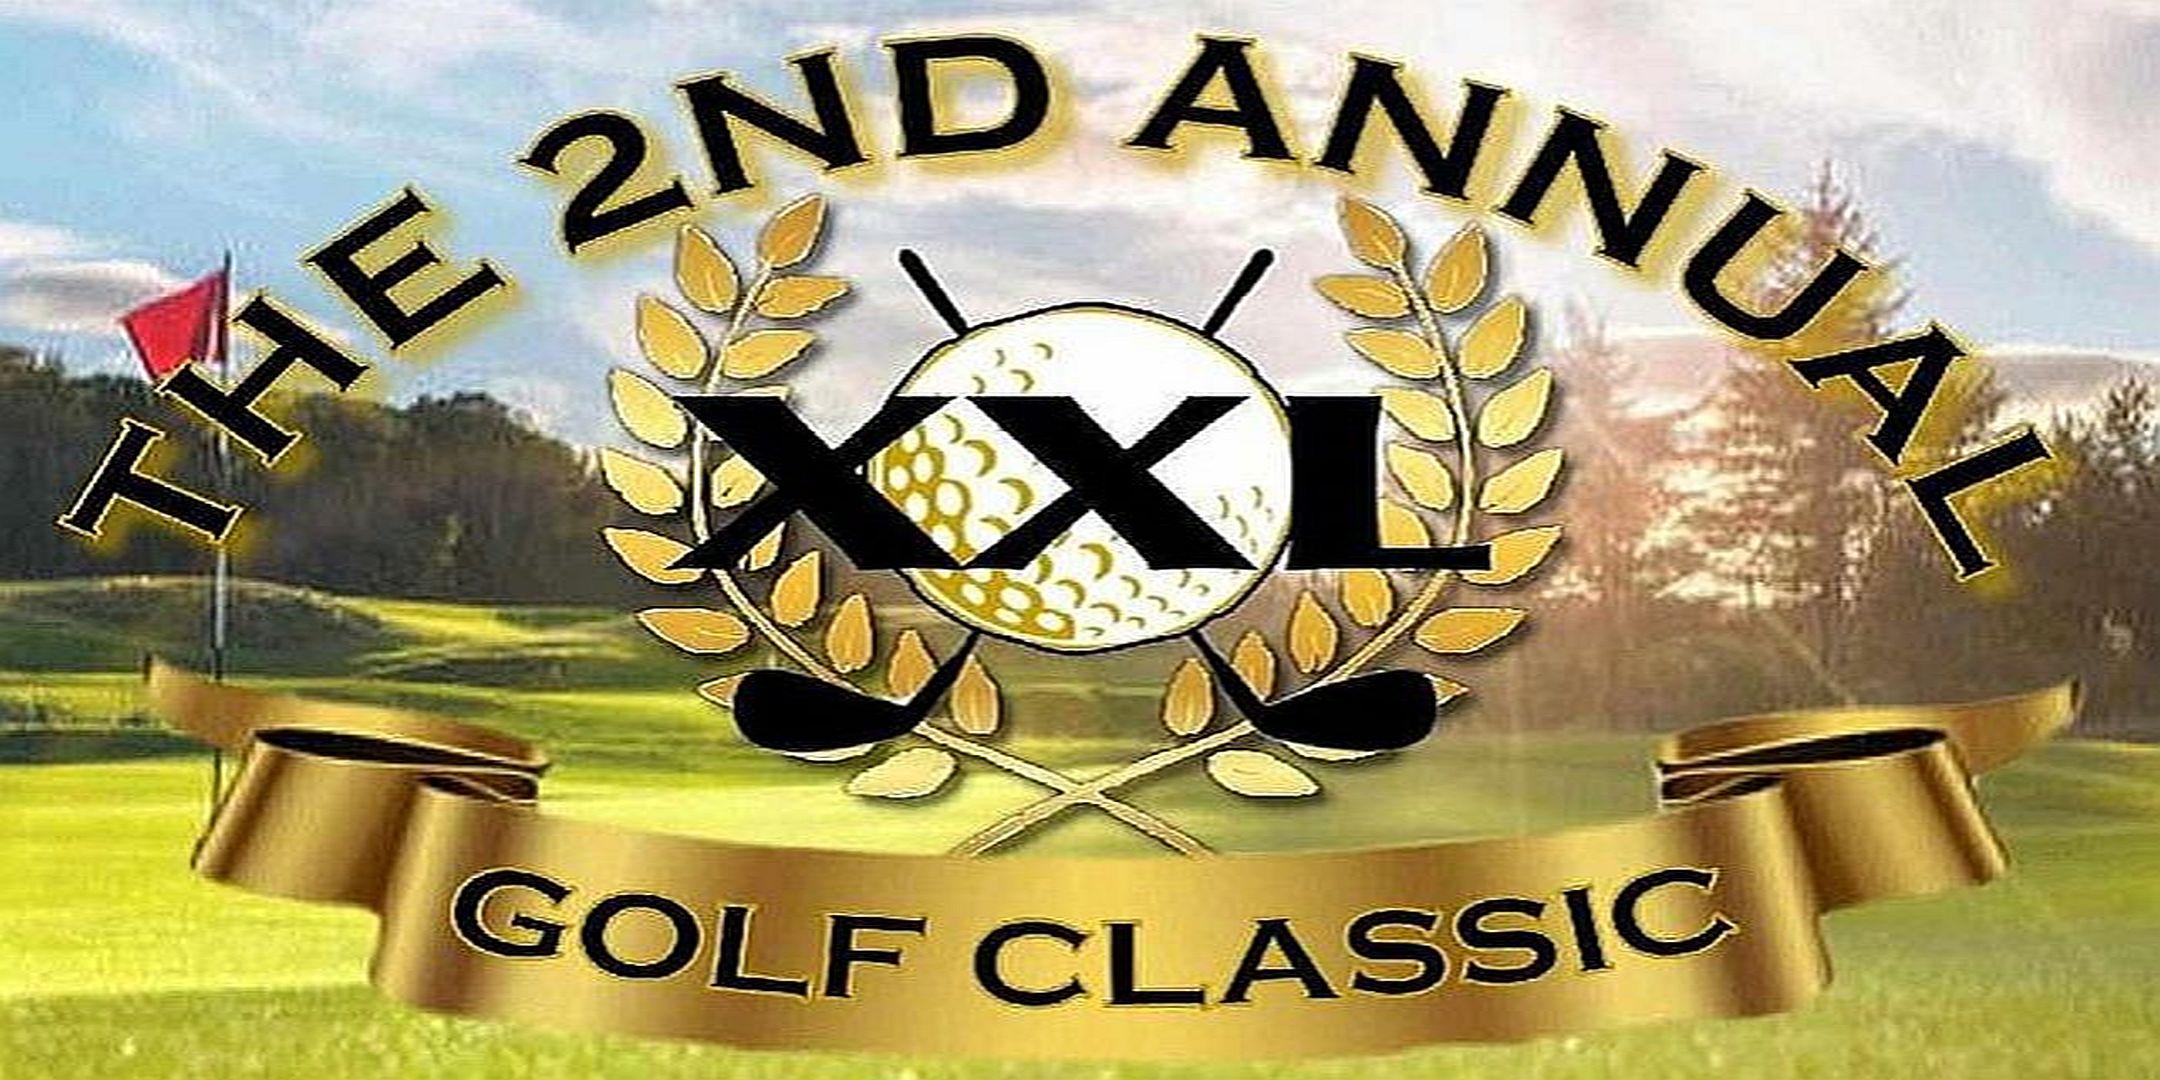 THE 2ND ANNUAL XXL GOLF CLASSIC